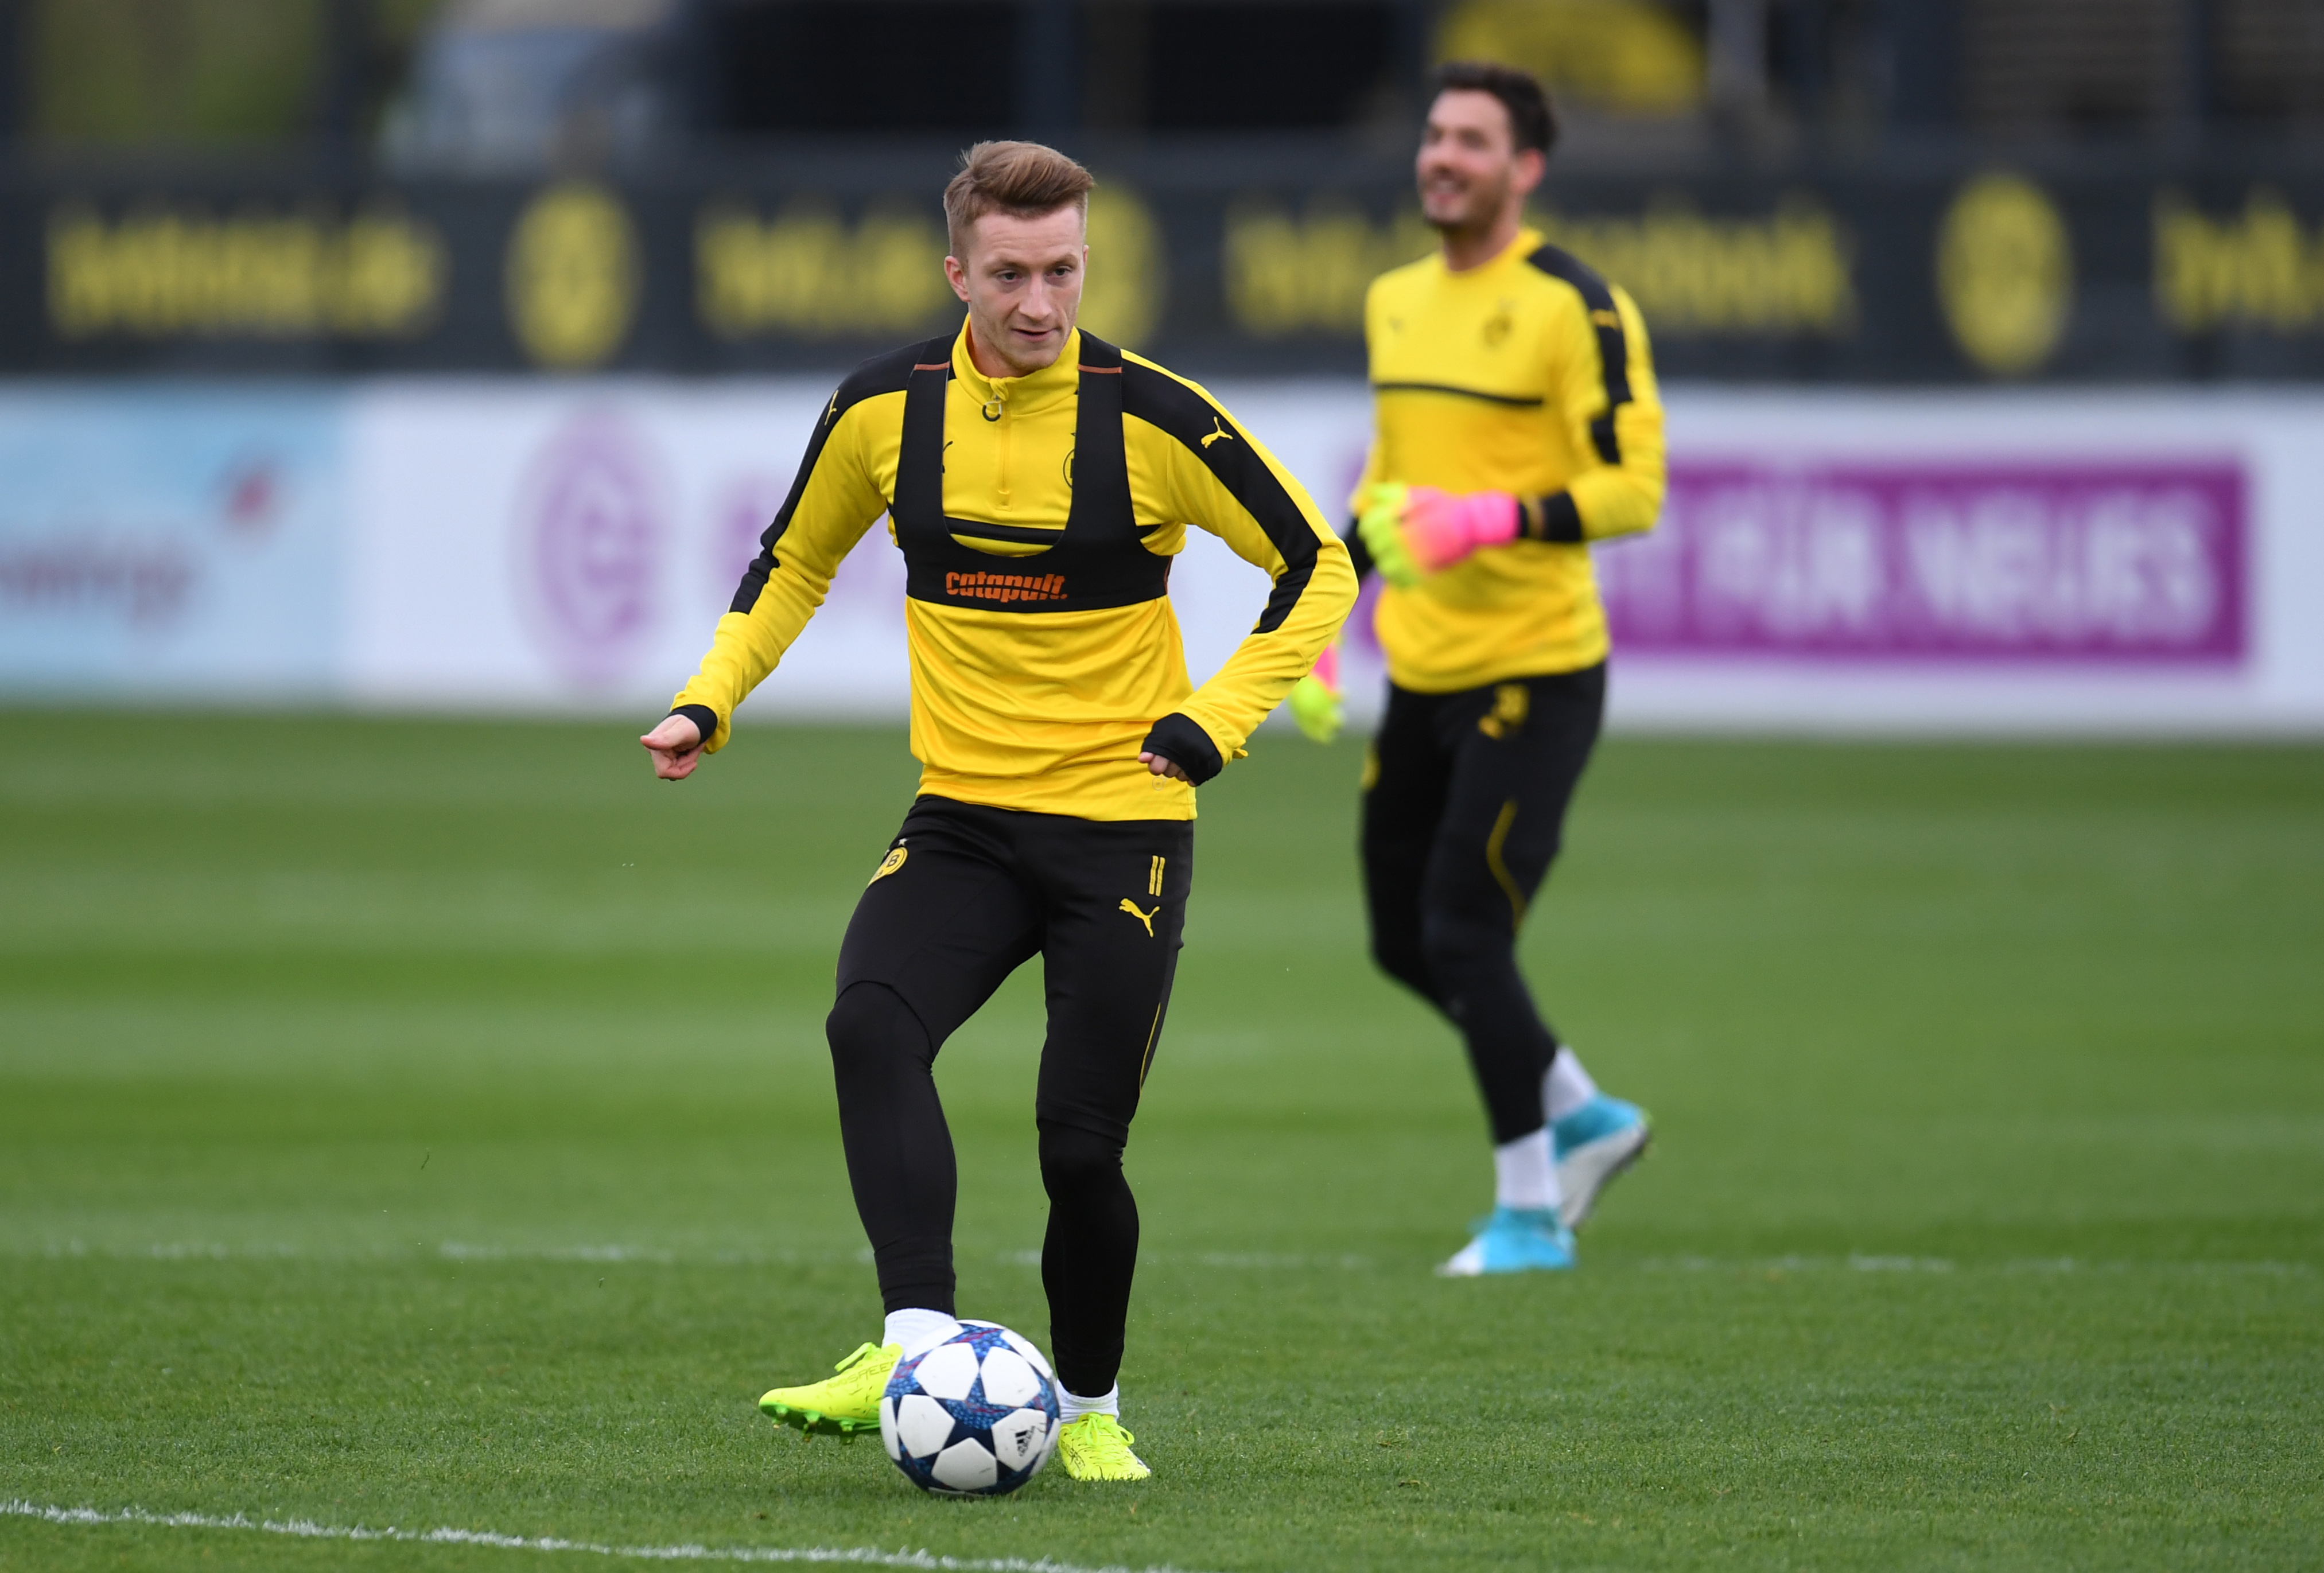 Can Marco Reus guide his team to a victory against Monaco?  (Photo by Patrik Stollarz/AFP/Getty Images)